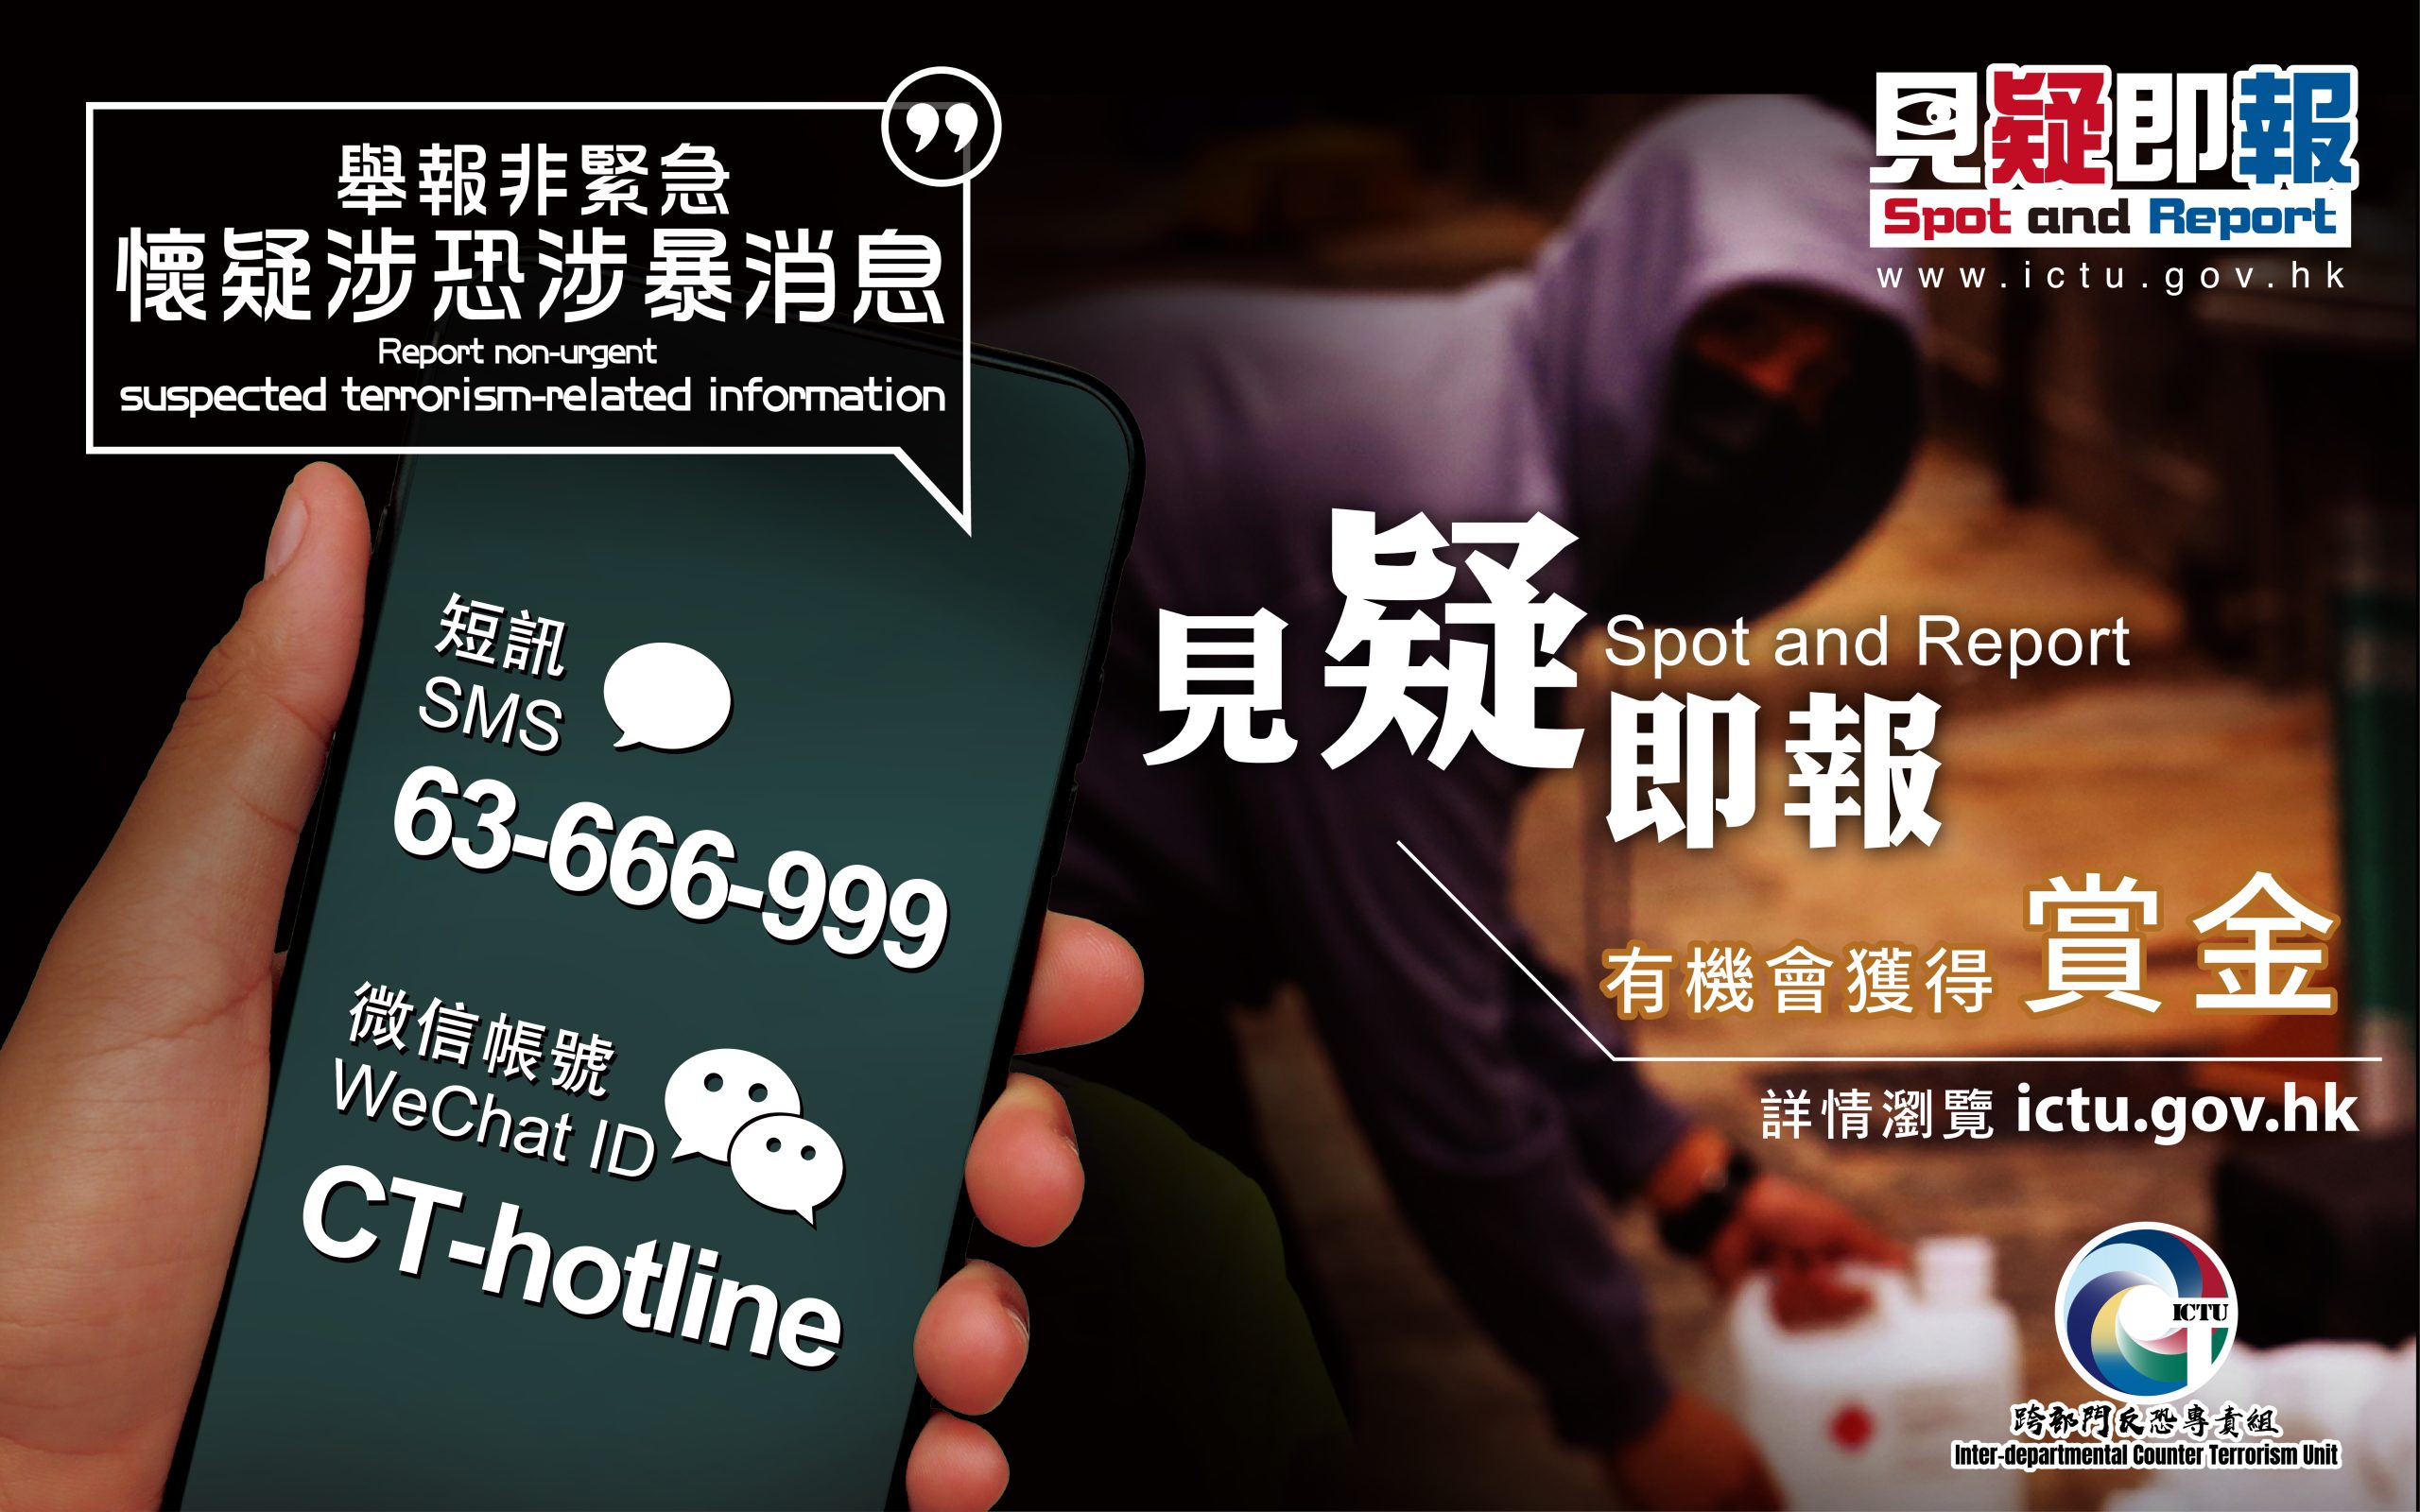 “New Promotional Video – CT Reporting Hotline and CT Reward